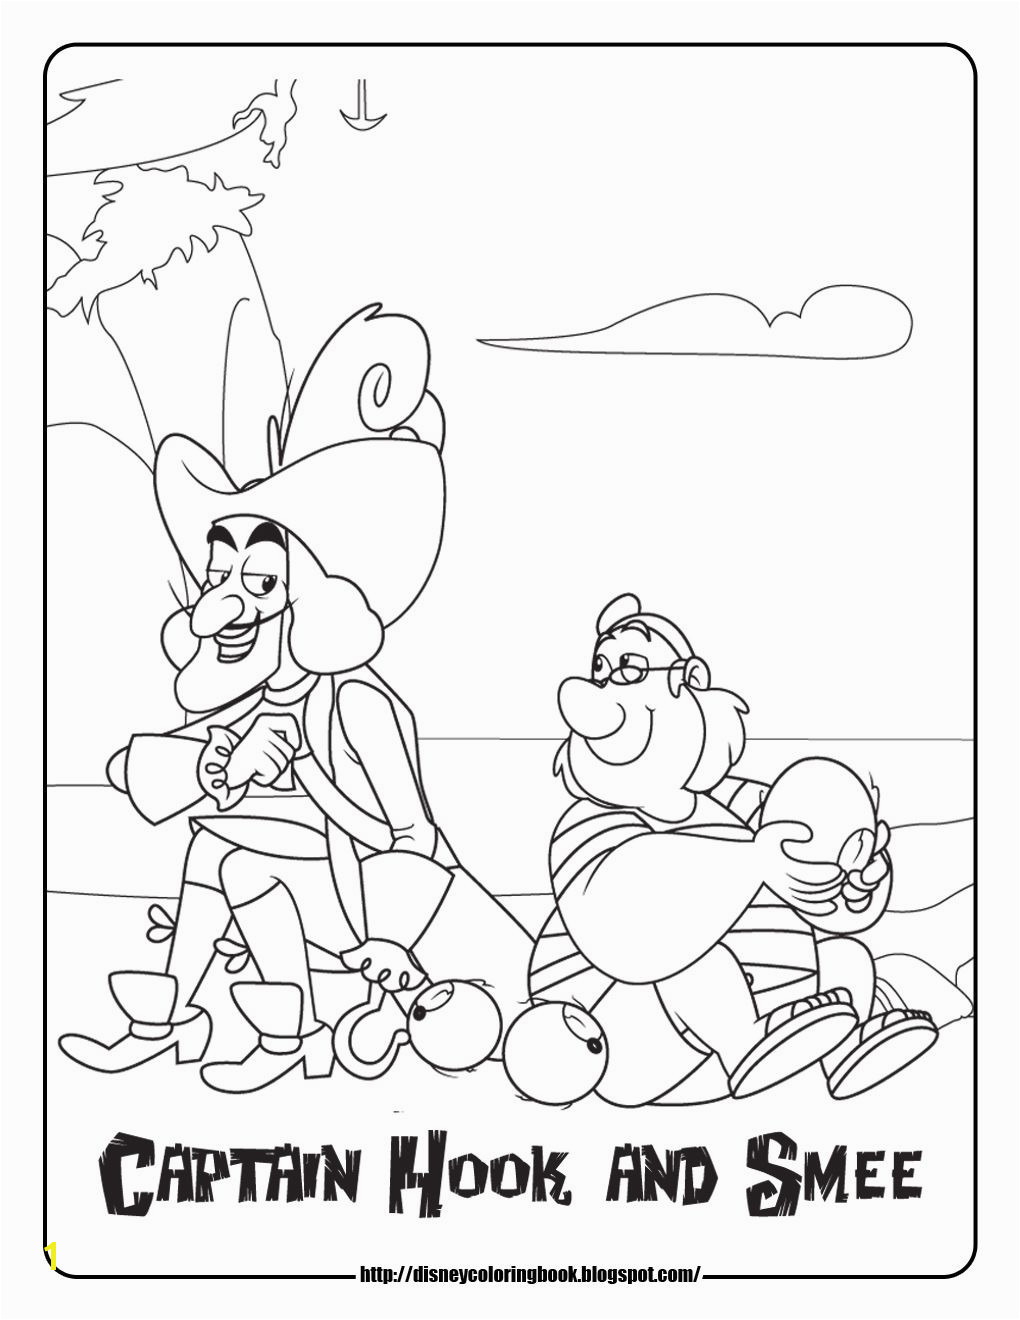 jake and the neverland pirates coloring pages